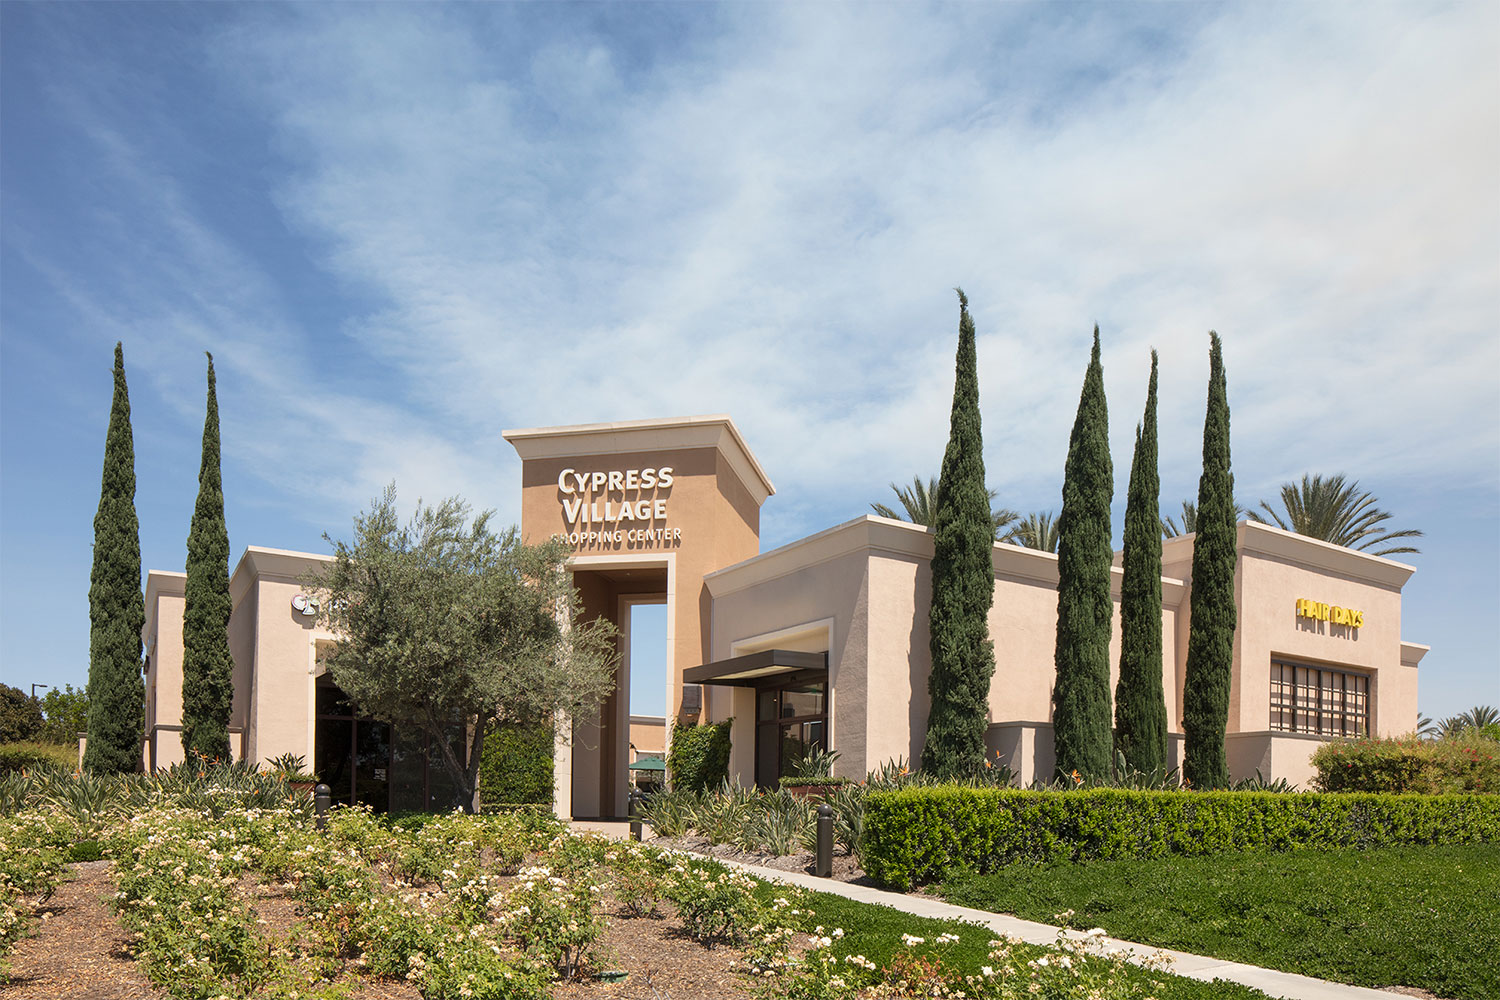  Daytime exterior view of Cypress Village Shopping Center